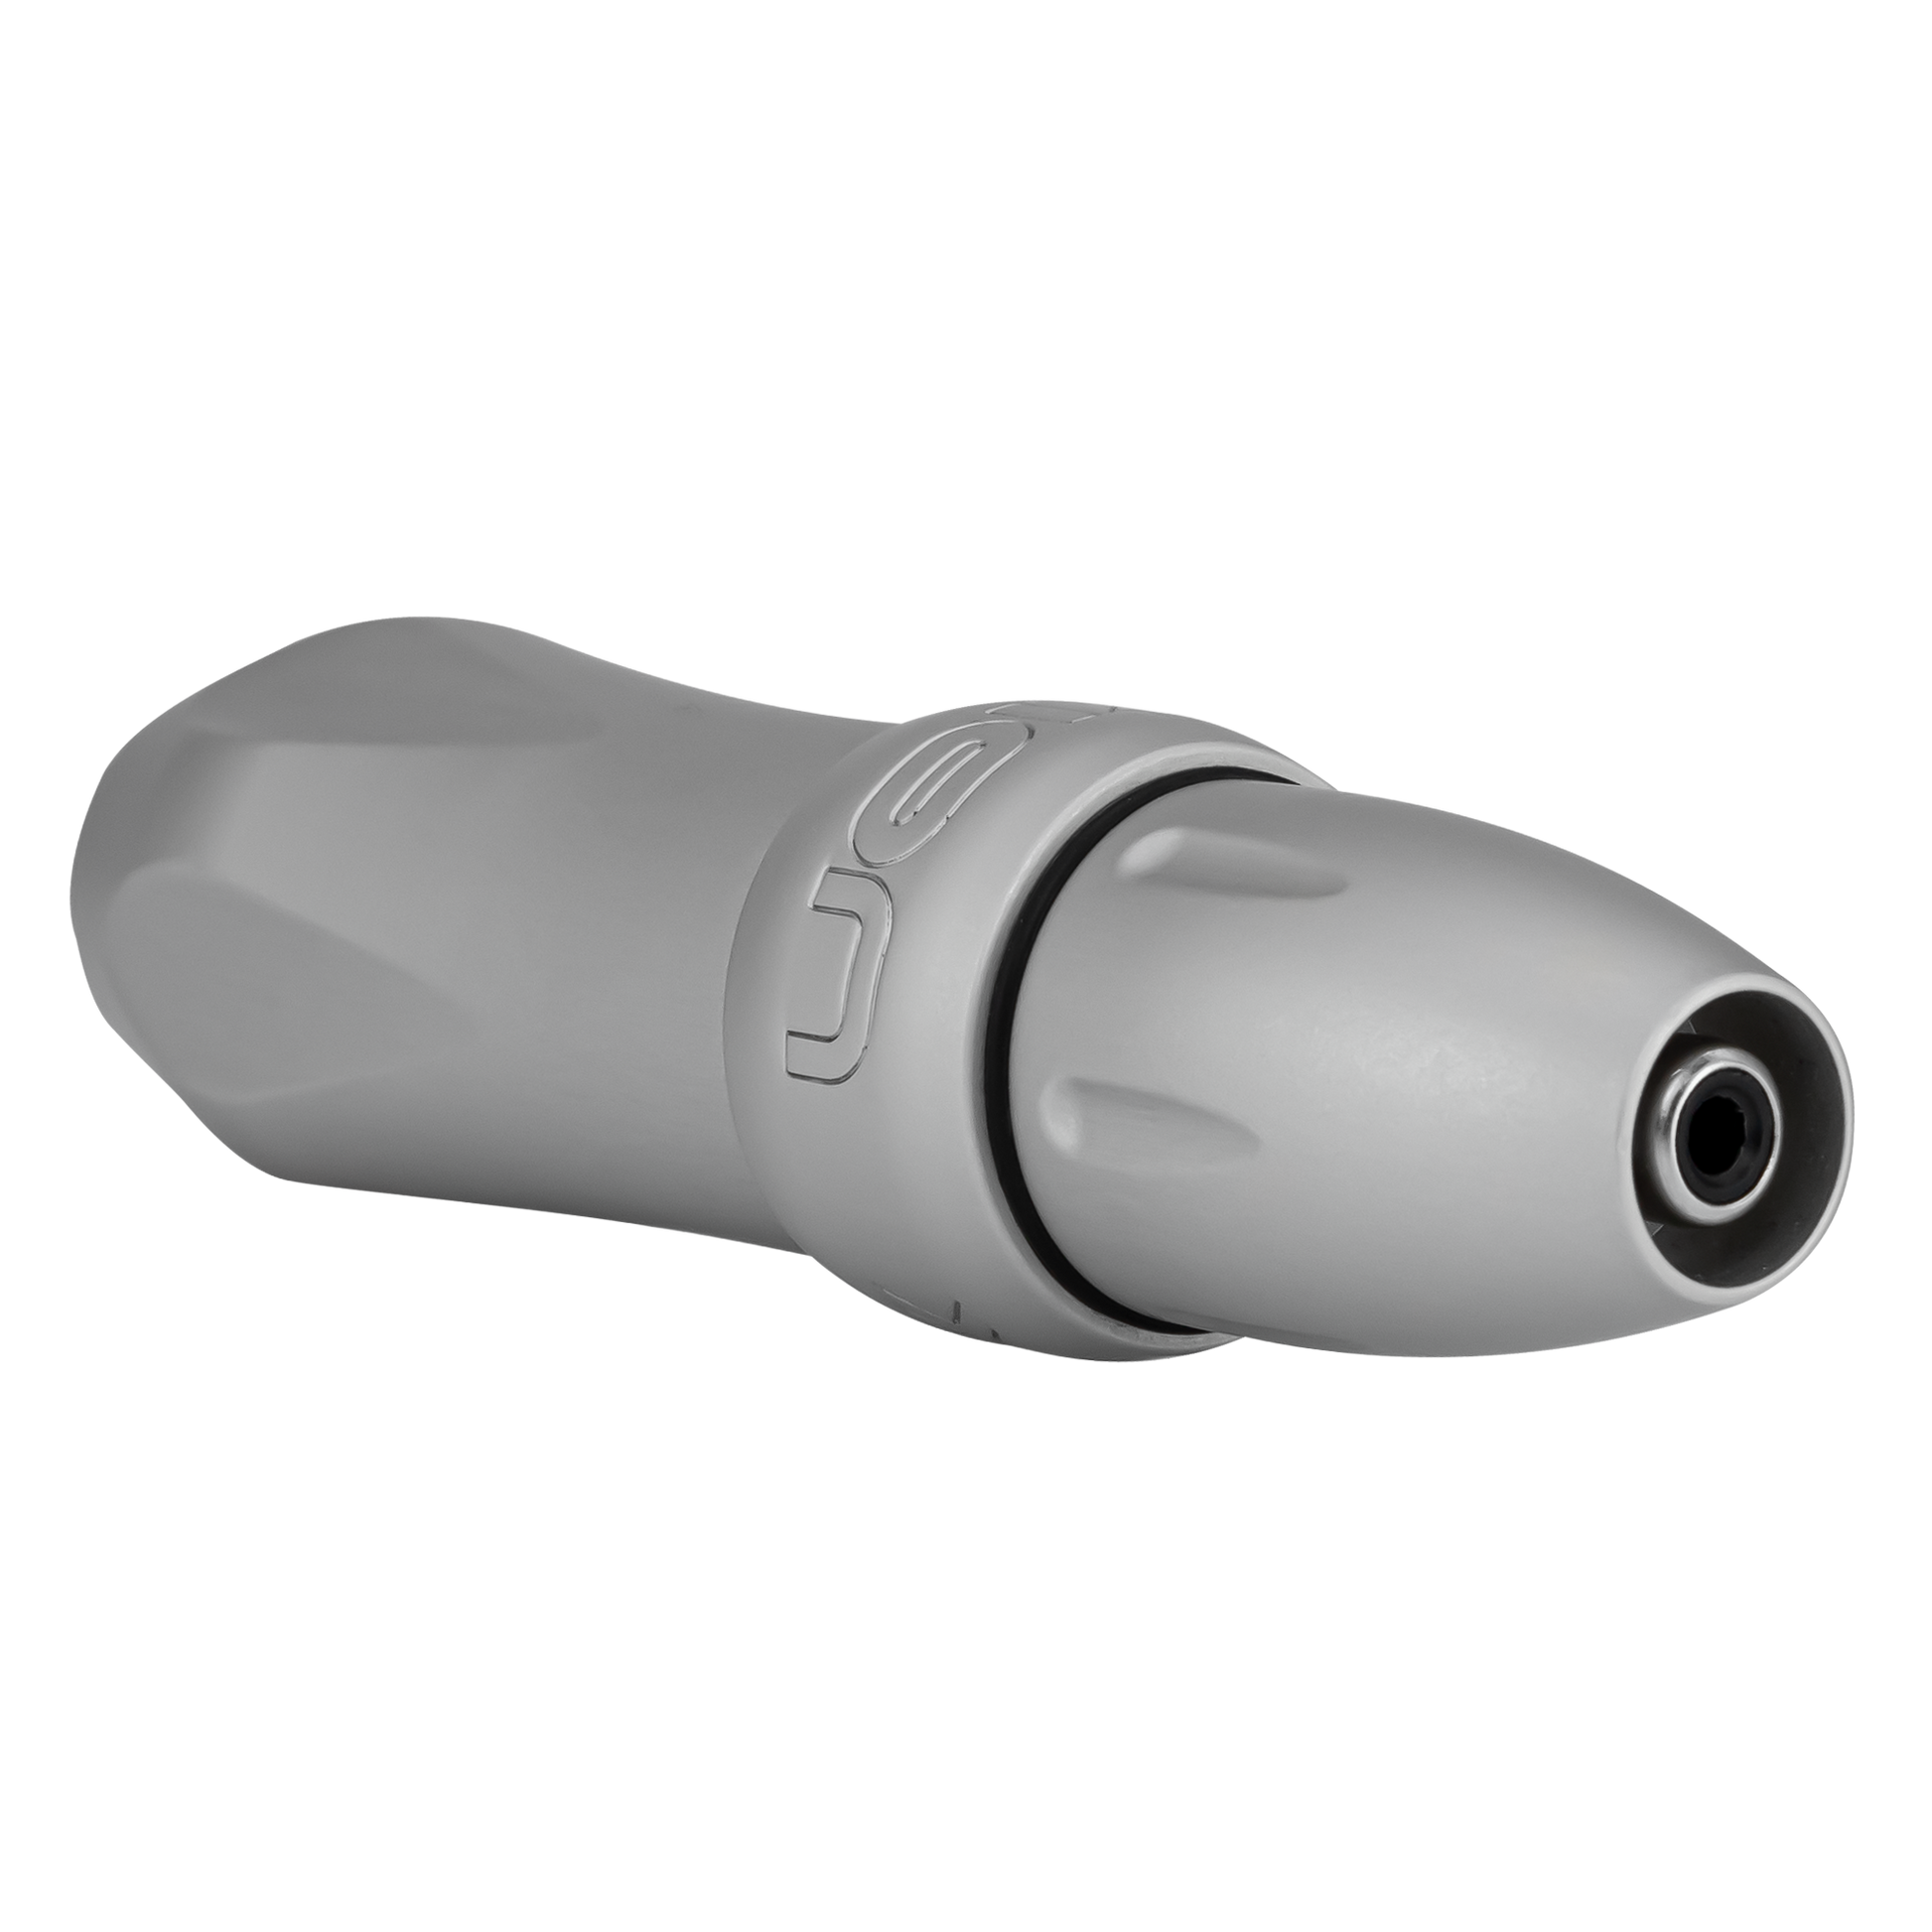 Spektra Xion in a frosted silvertone/gray color, view from the plug